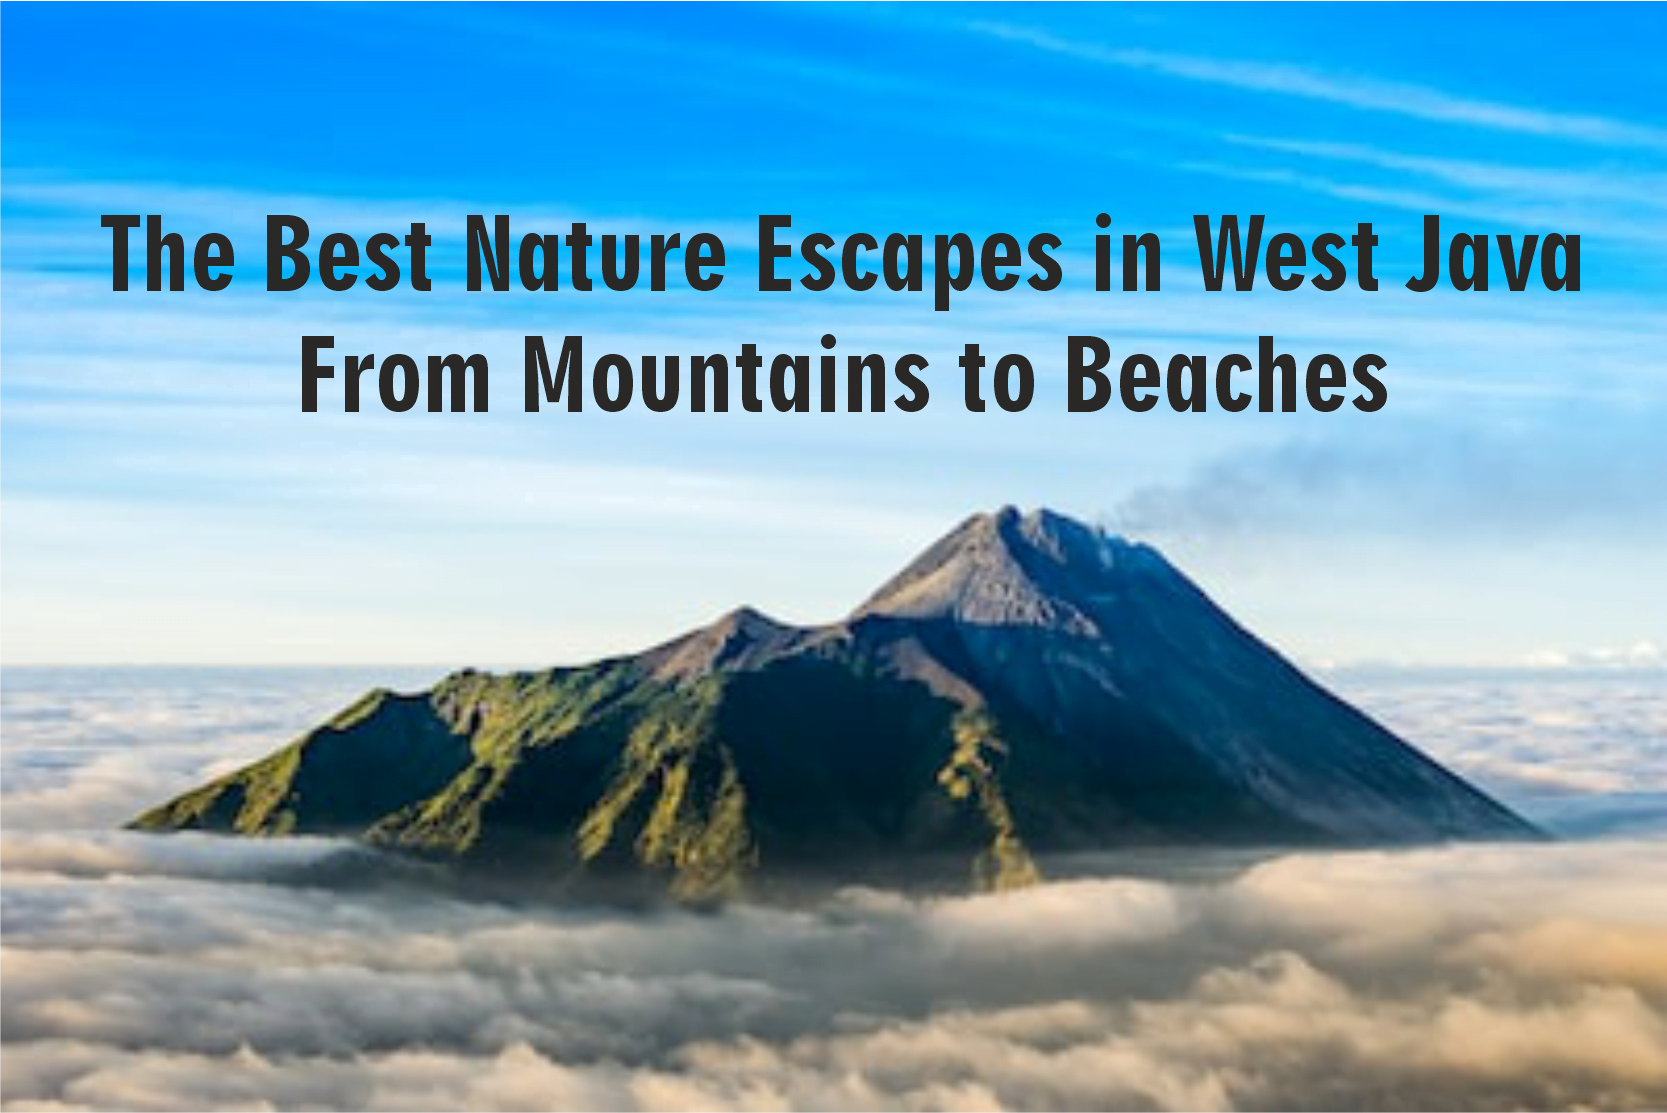 The Best Nature Escapes in West Java: From Mountains to Beaches